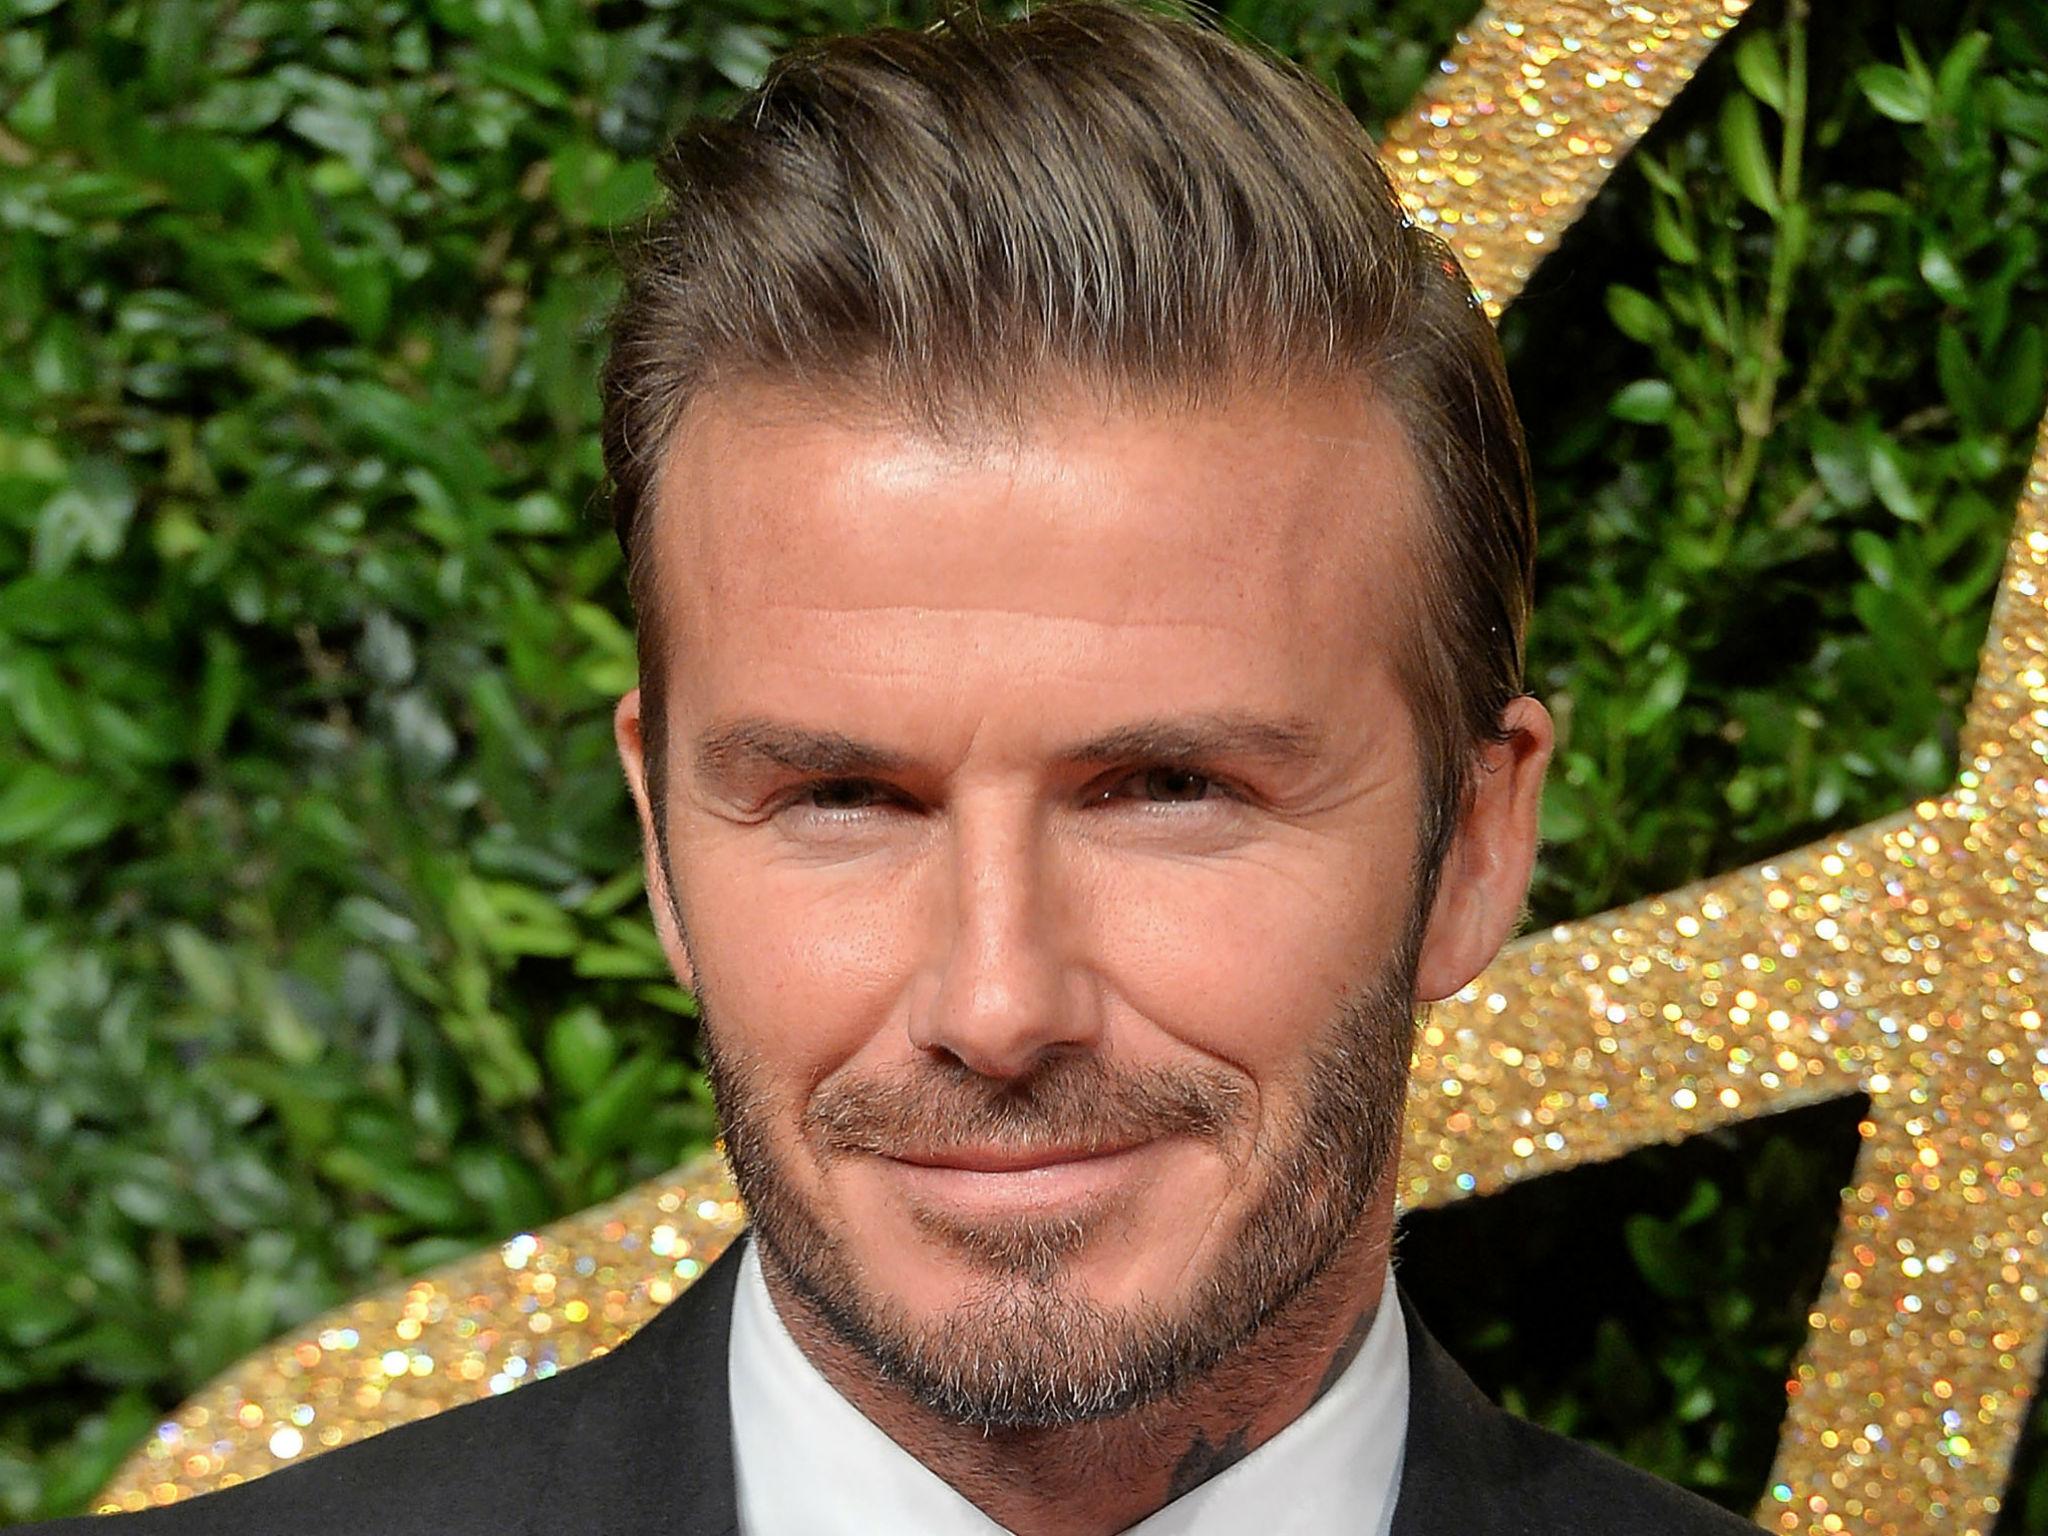 David Beckham said 'we should be facing the problems of the world together and not alone'